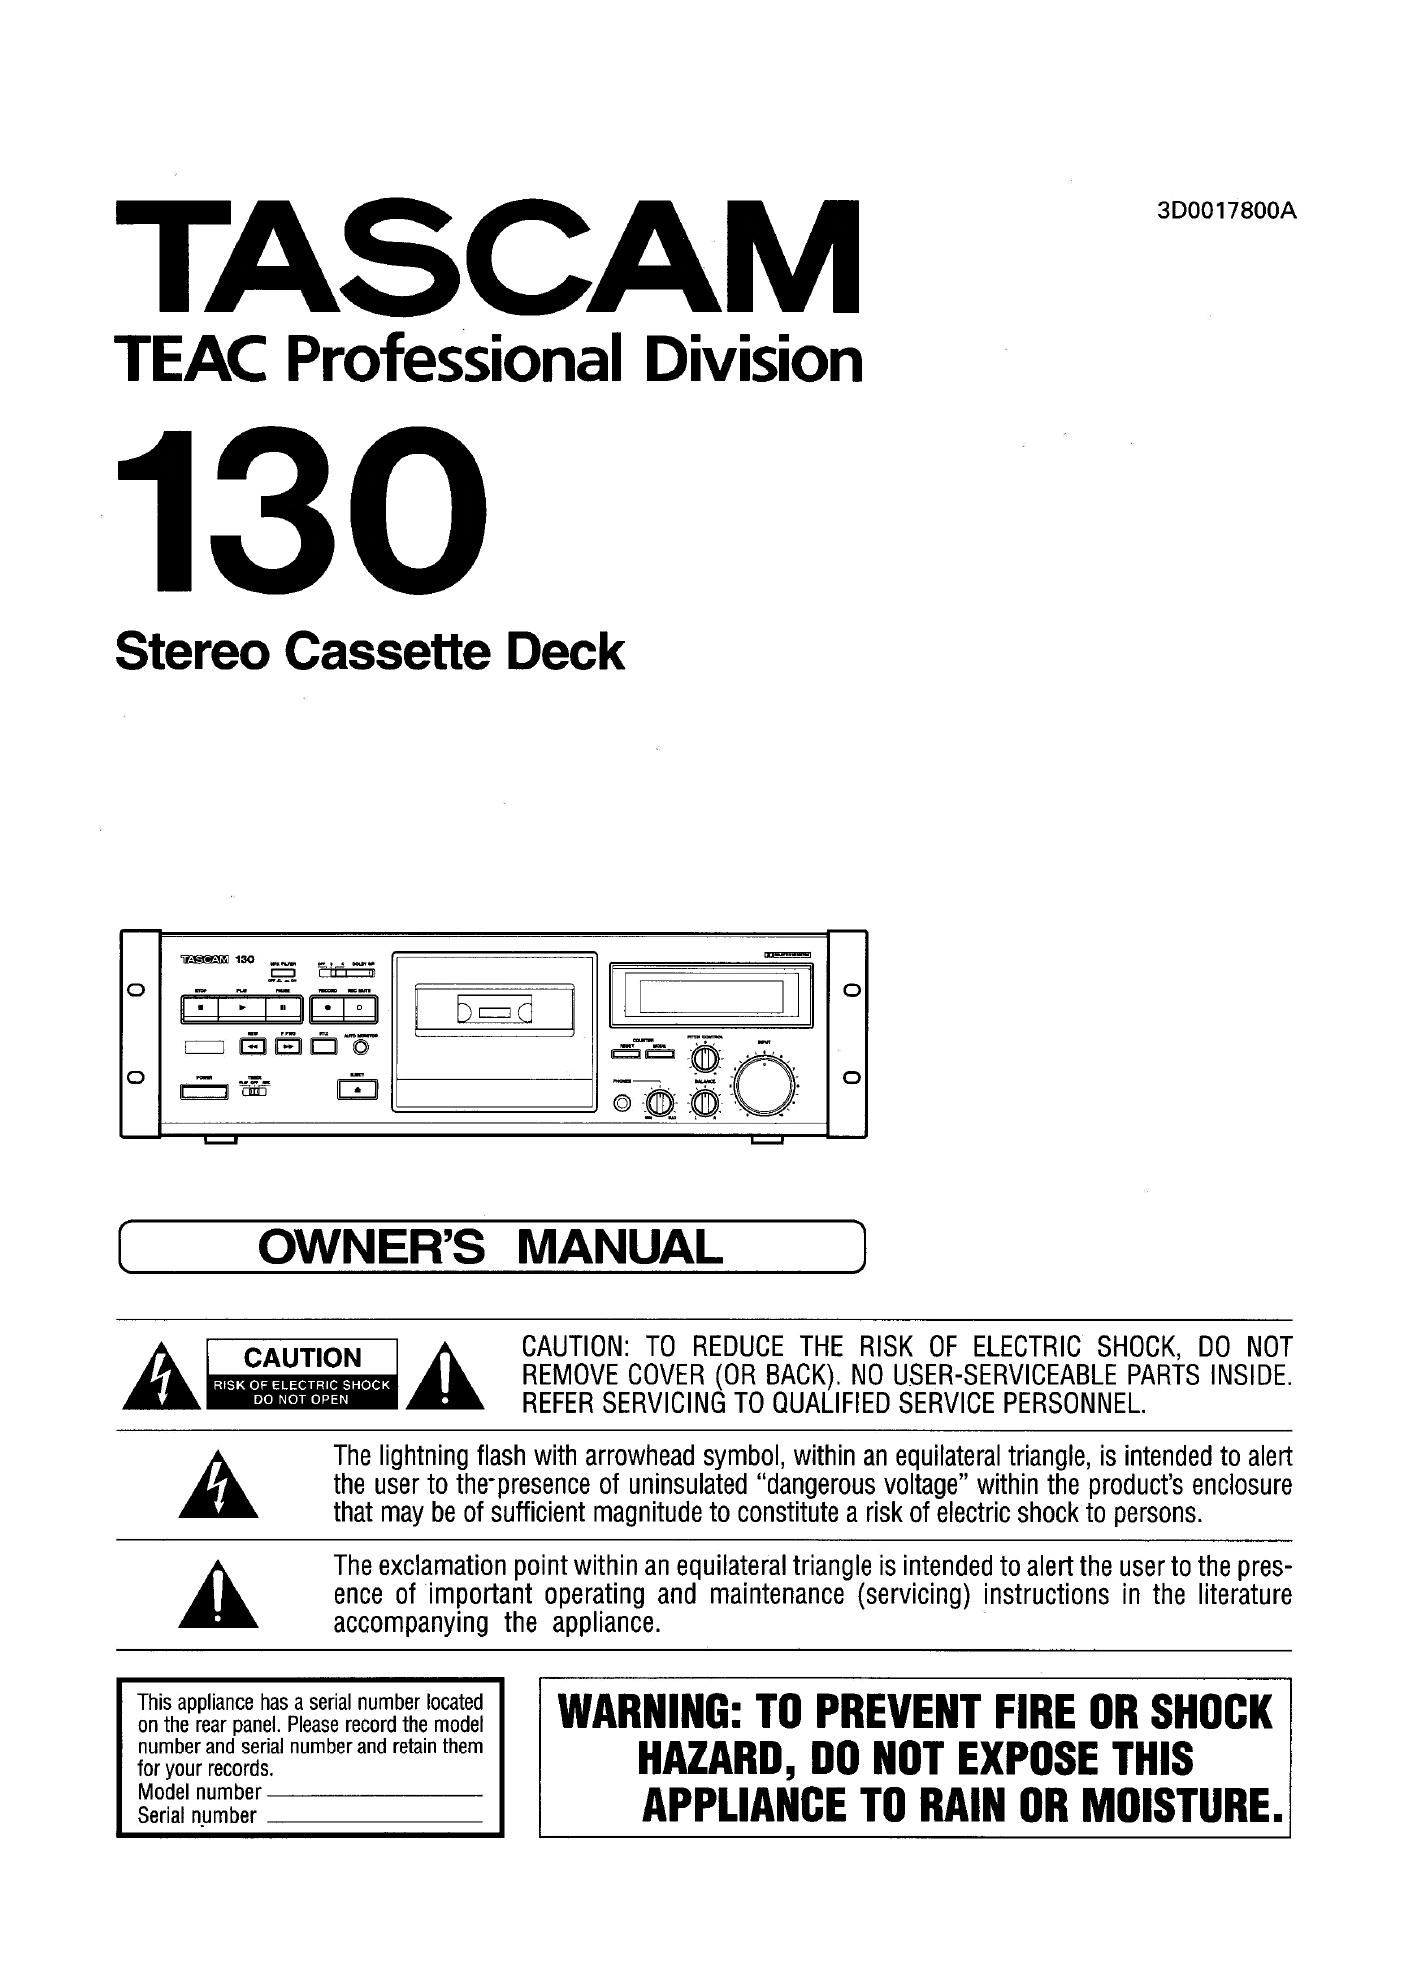 Tascam 130 Owners Manual